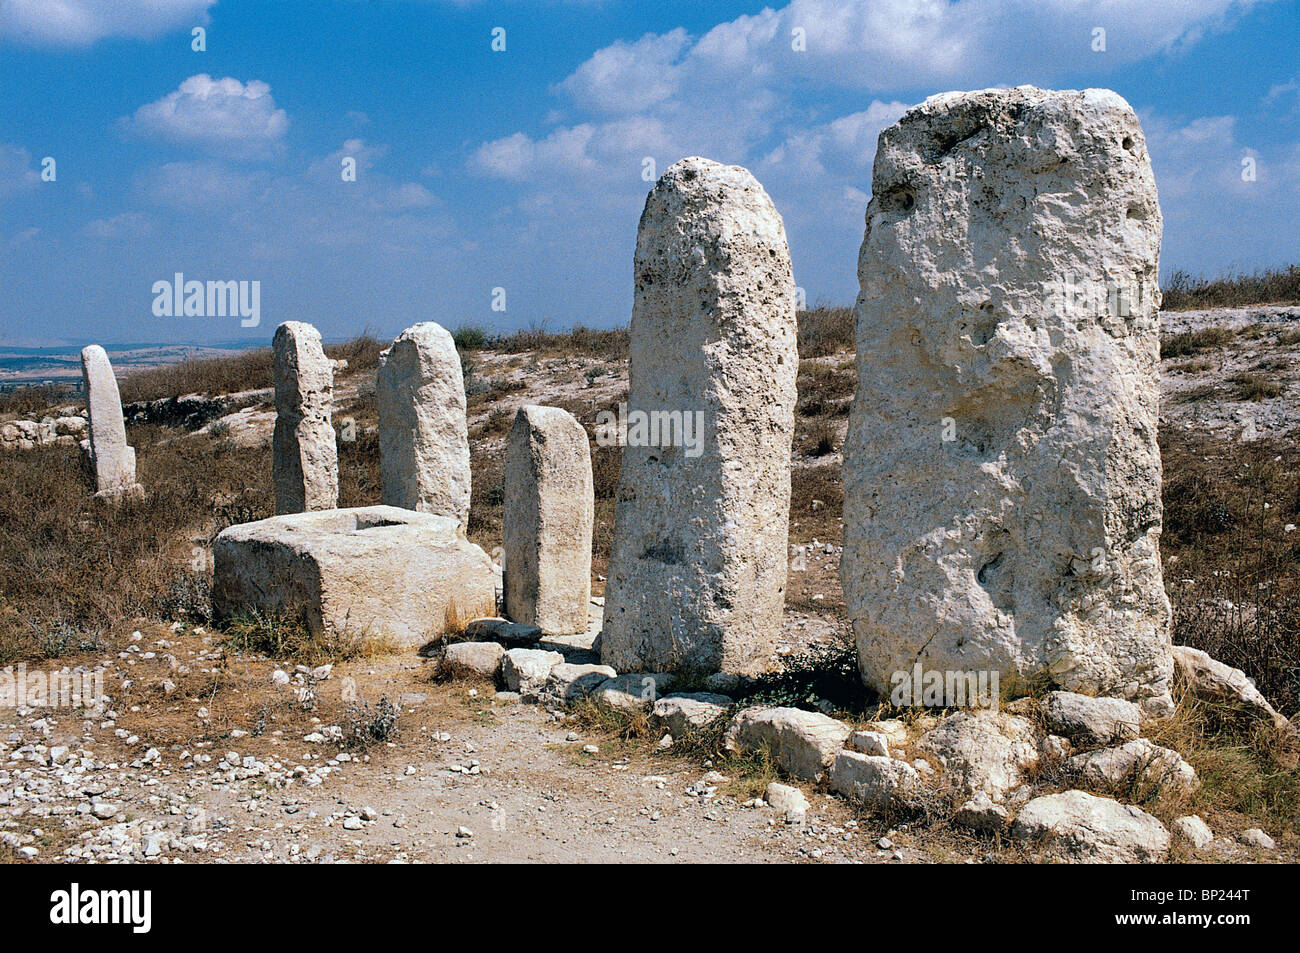 GEZER - CNAANITE CITY LOCATED ON THE MAIN ROUTES OF THE COASTAL PLAIN. CONQUERED BY JOSHUA IN 12TH. C. BC. Stock Photo